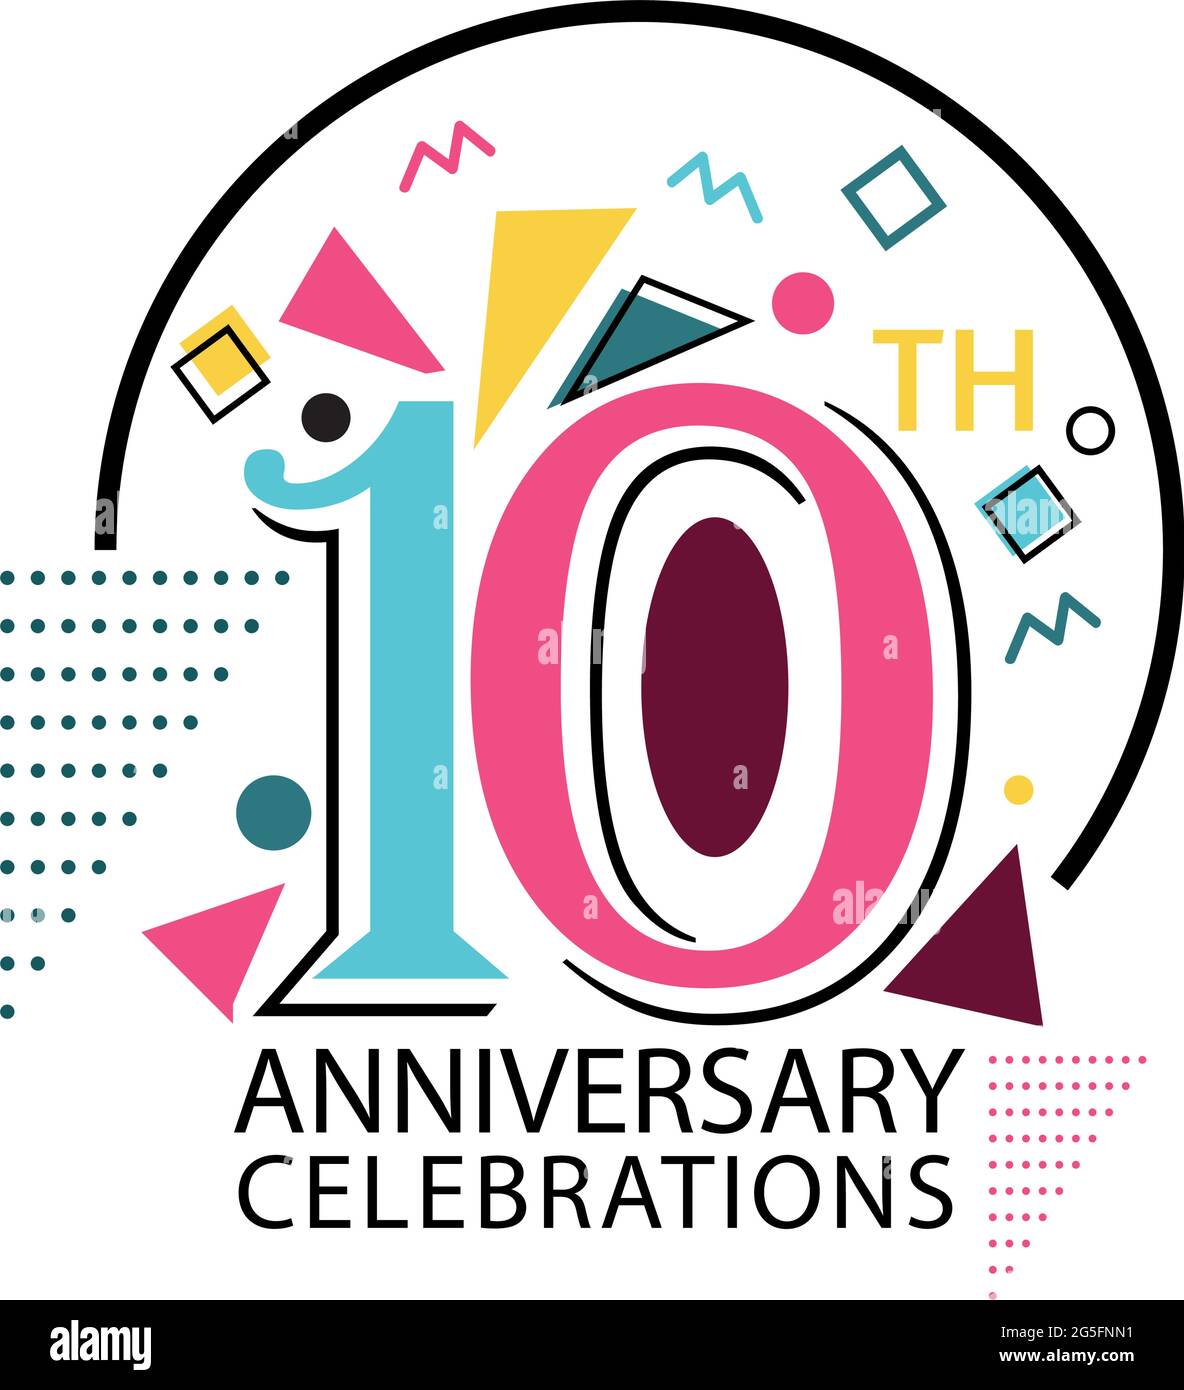 10 Years Anniversary Celebration Colorful Background Flat Design